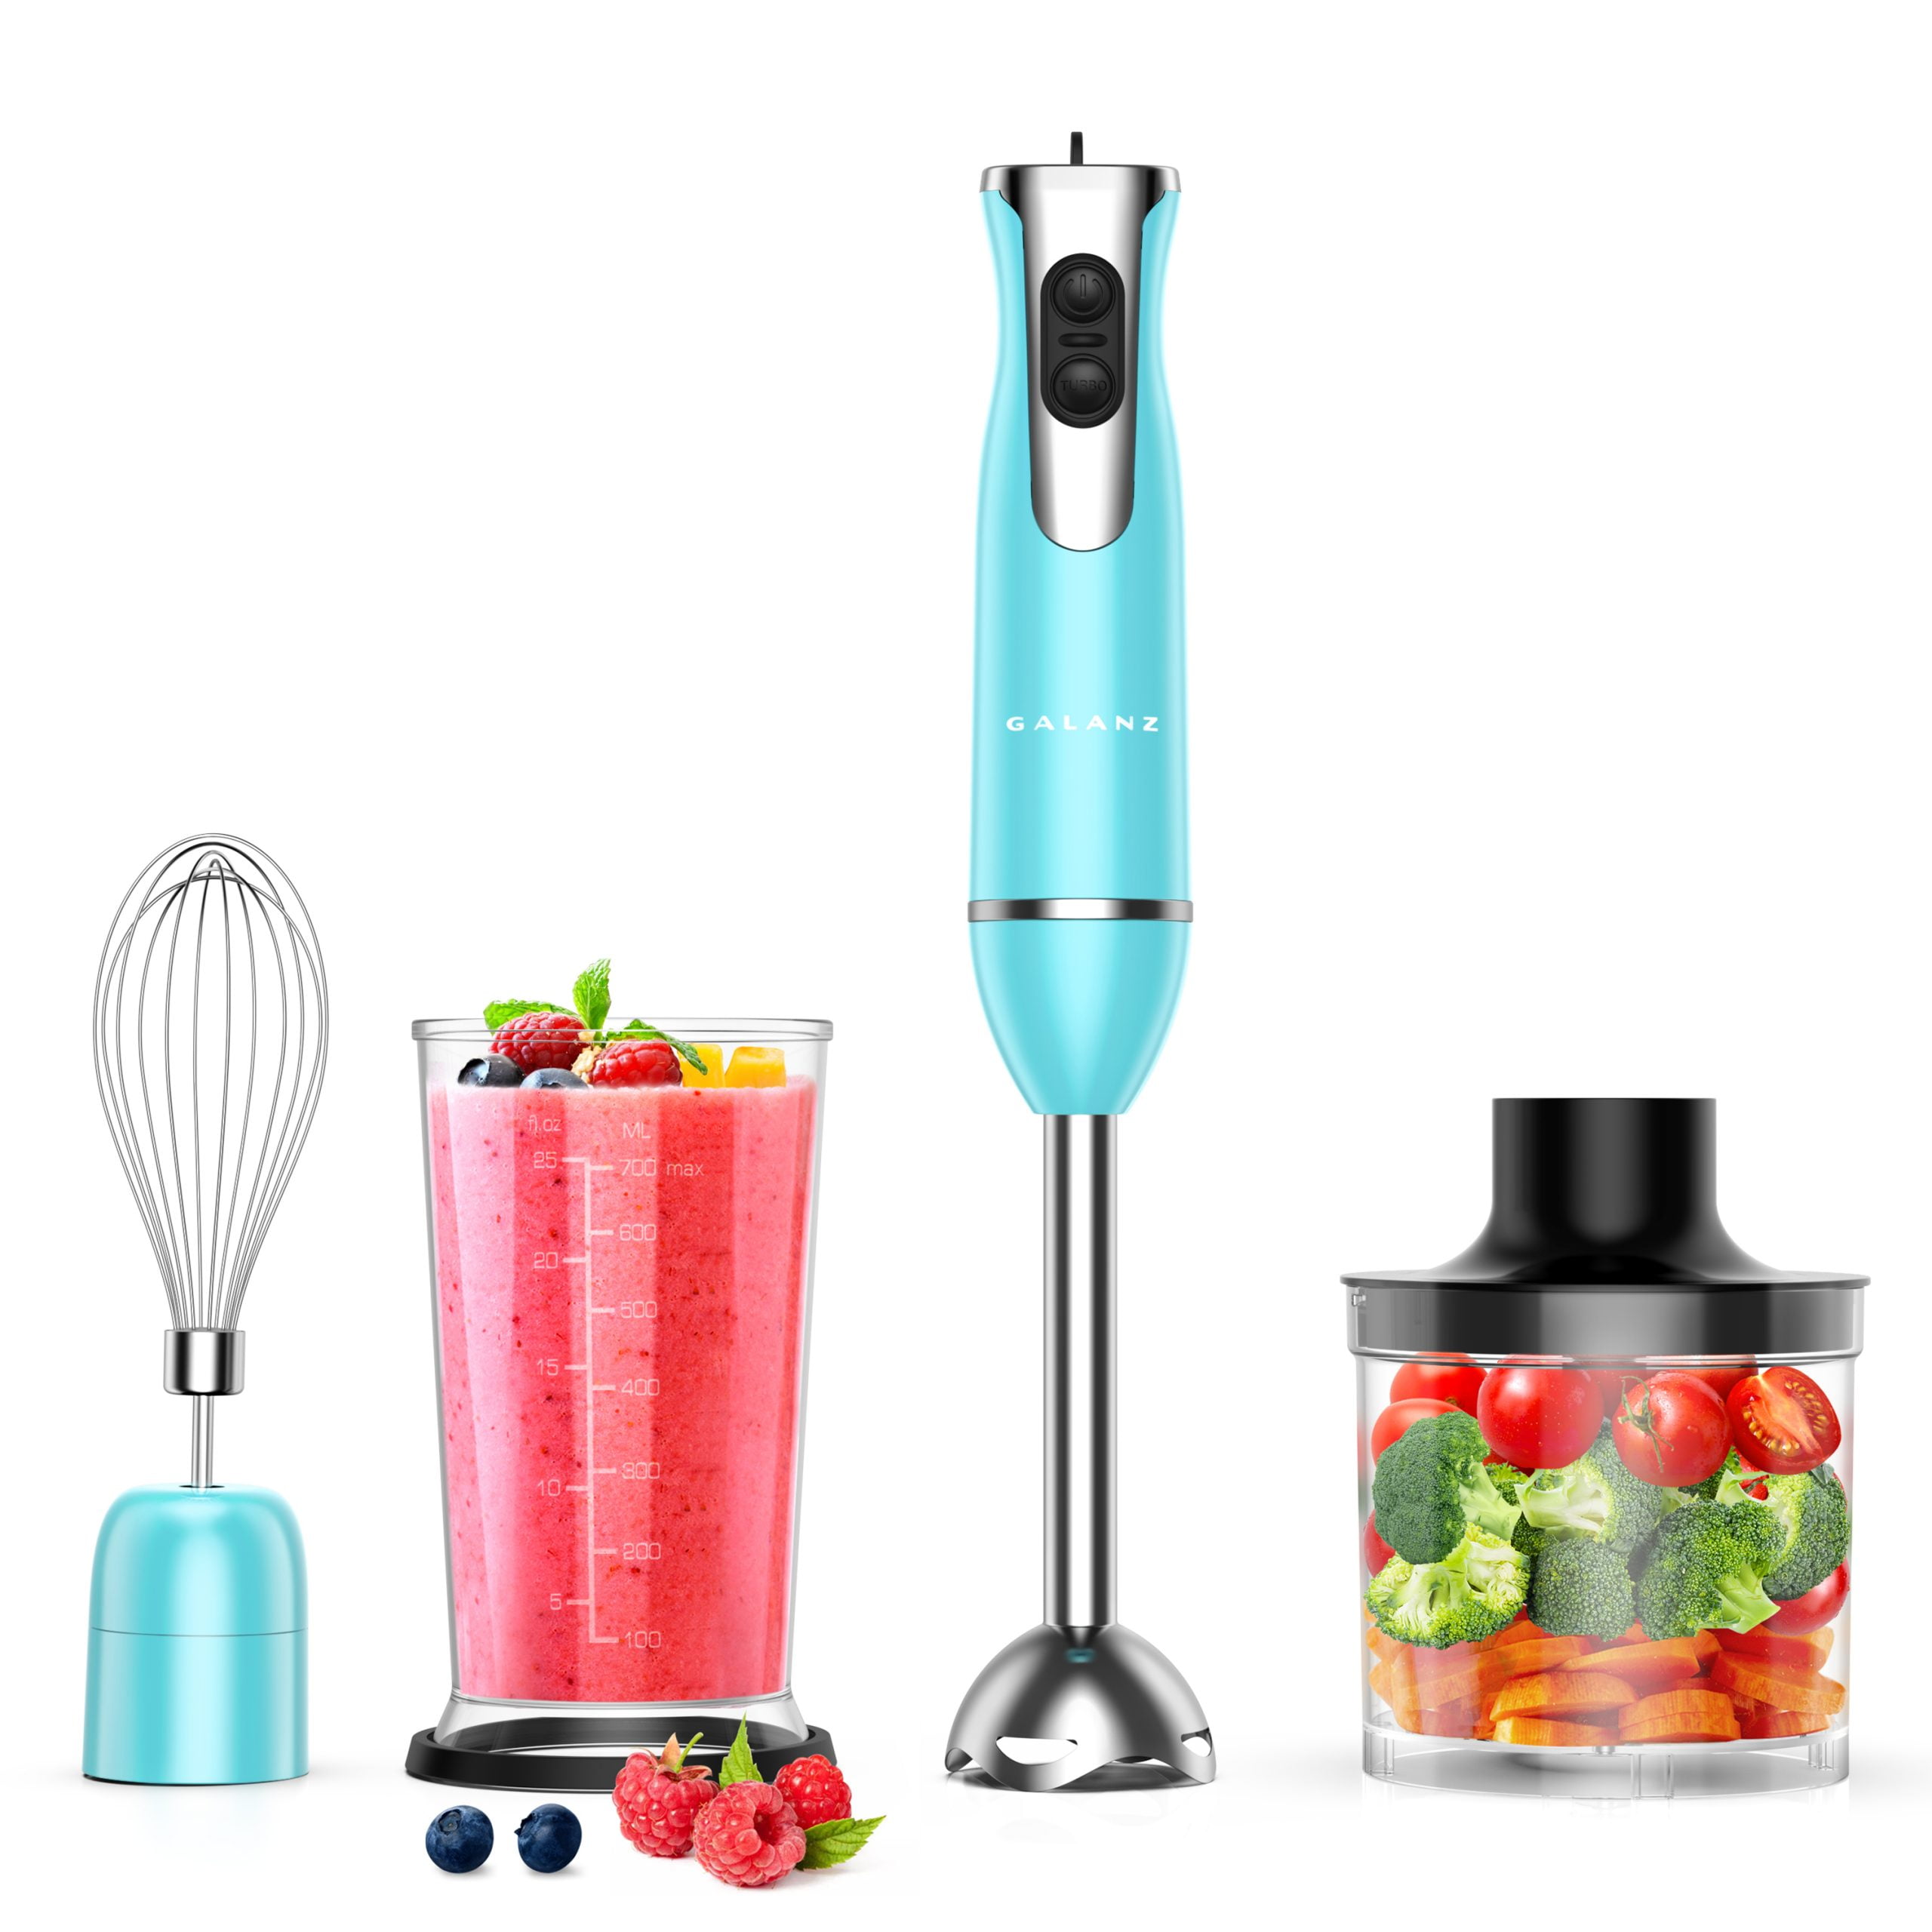  20-Speed Immersion Hand Blender with Whisk for